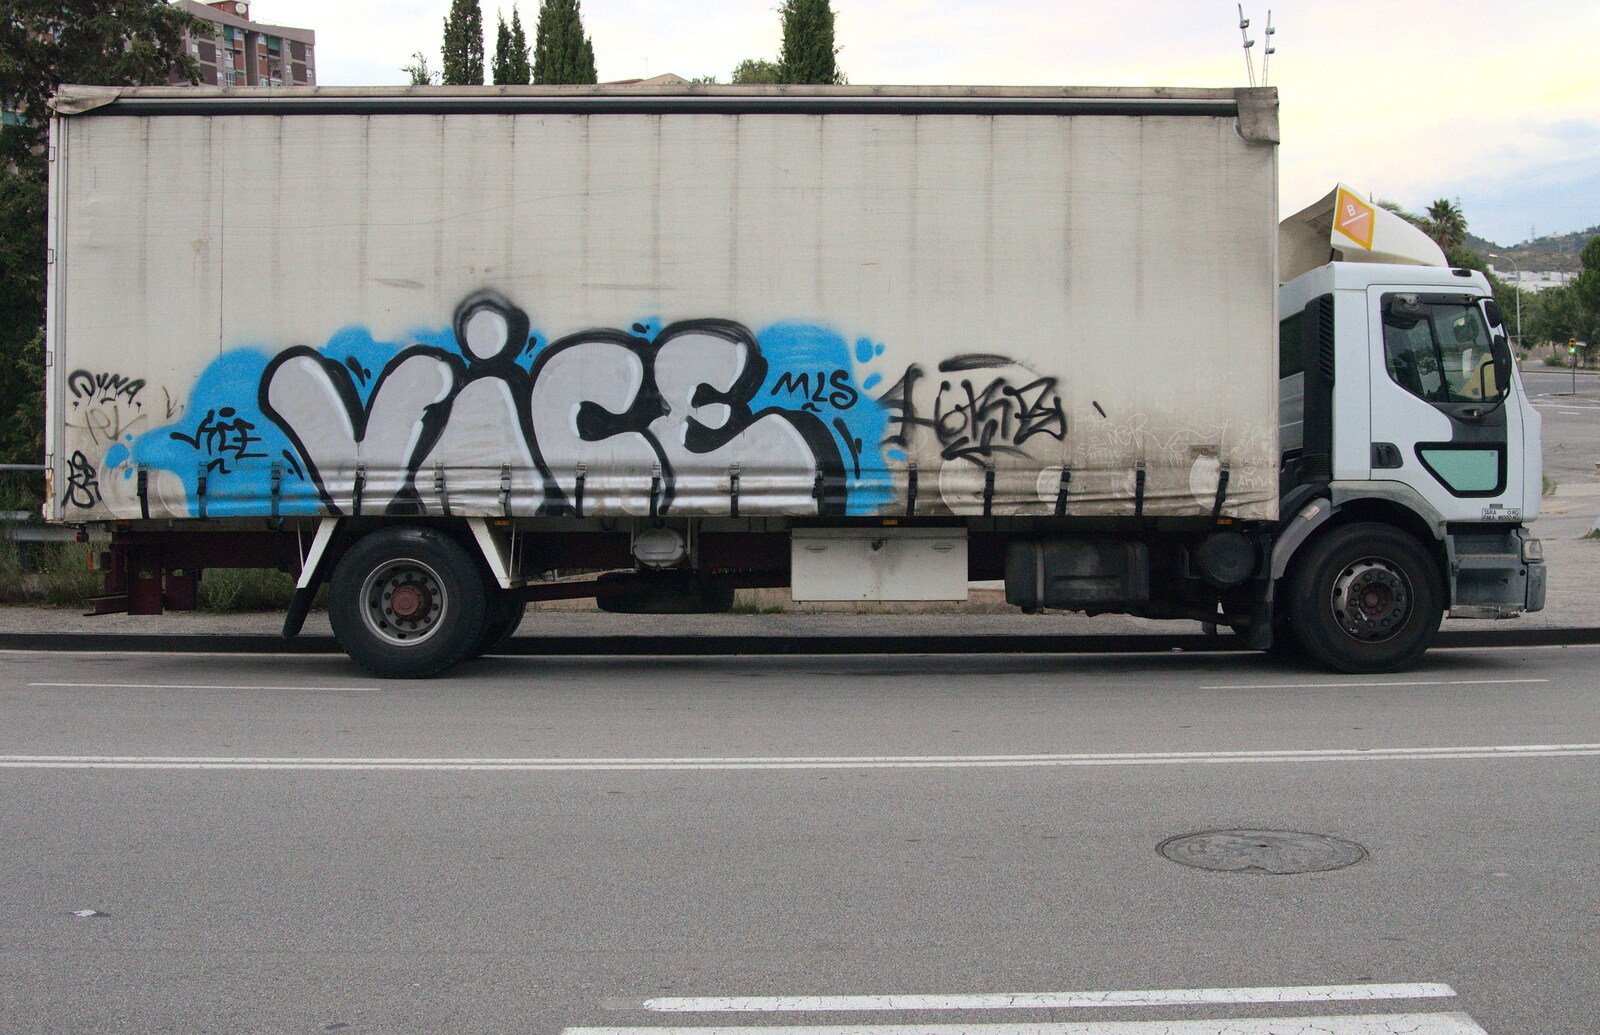 Truck-side graffiti from The Open Education Challenge, Barcelona, Catalonia - 13th July 2014